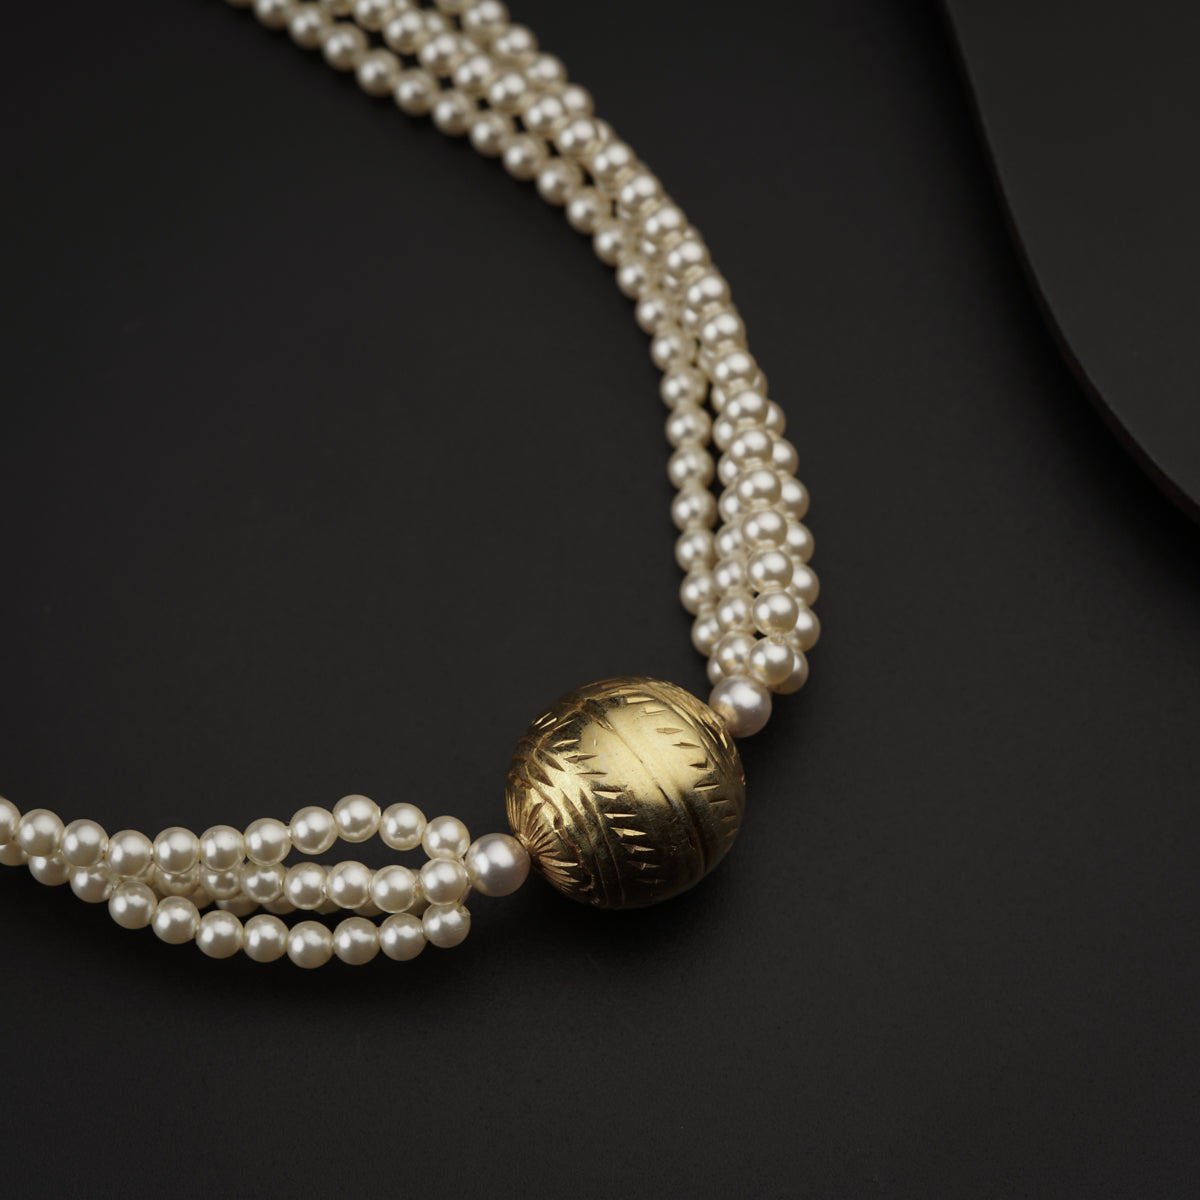 Textured Silver Beads Motif Necklace with Pearls Gold Plated